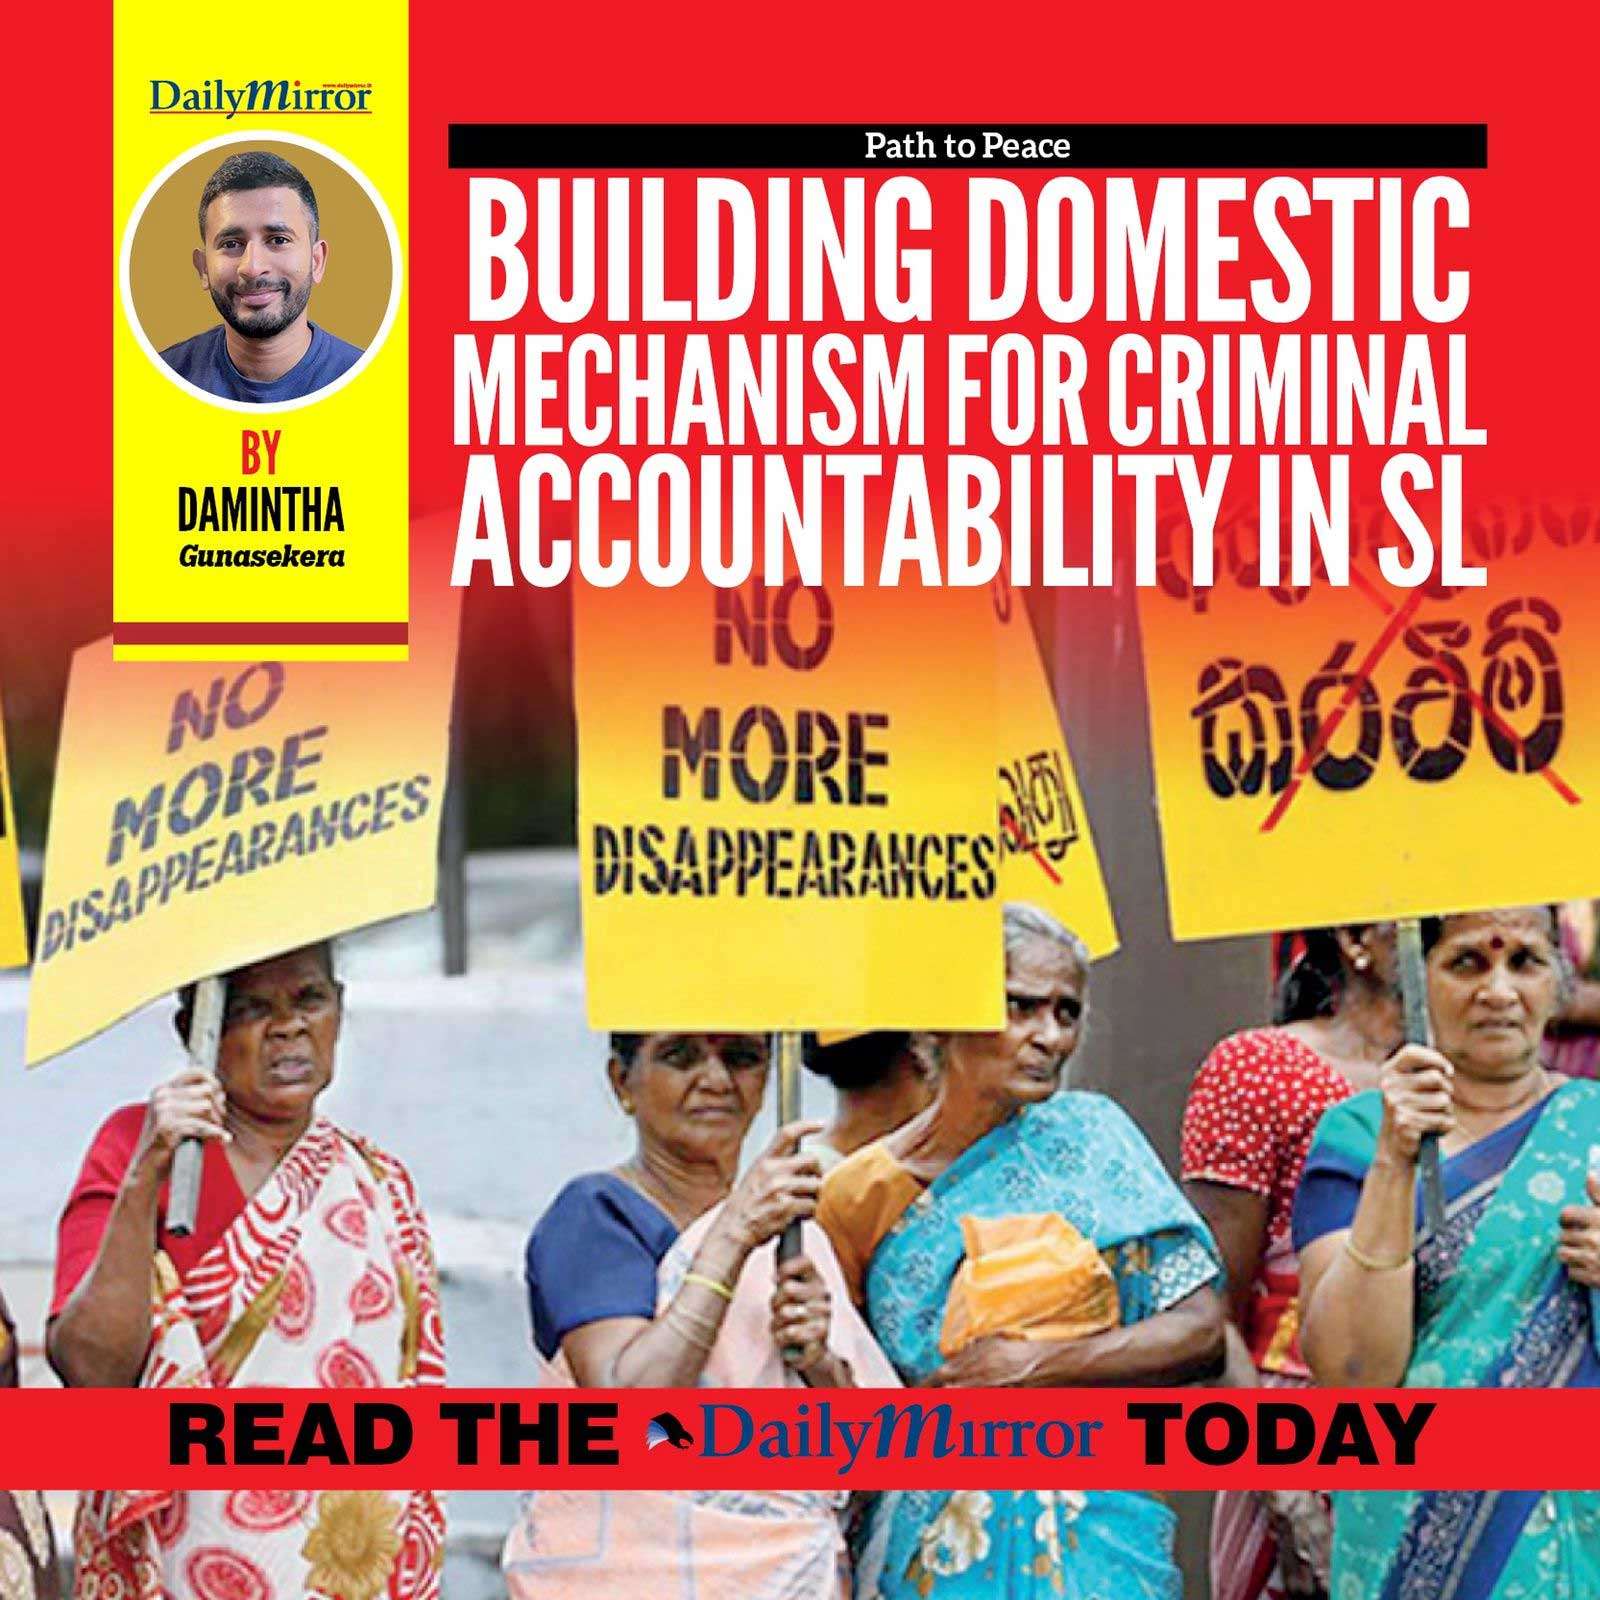 Path to Peace: Building Domestic Mechanism for Criminal Accountability in SL